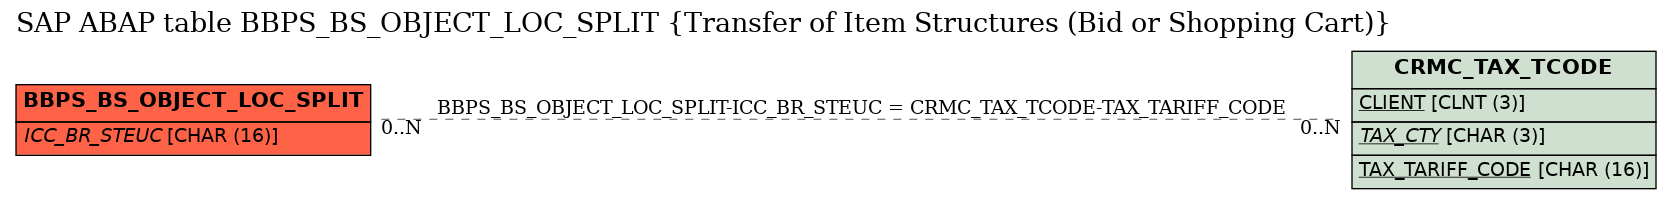 E-R Diagram for table BBPS_BS_OBJECT_LOC_SPLIT (Transfer of Item Structures (Bid or Shopping Cart))